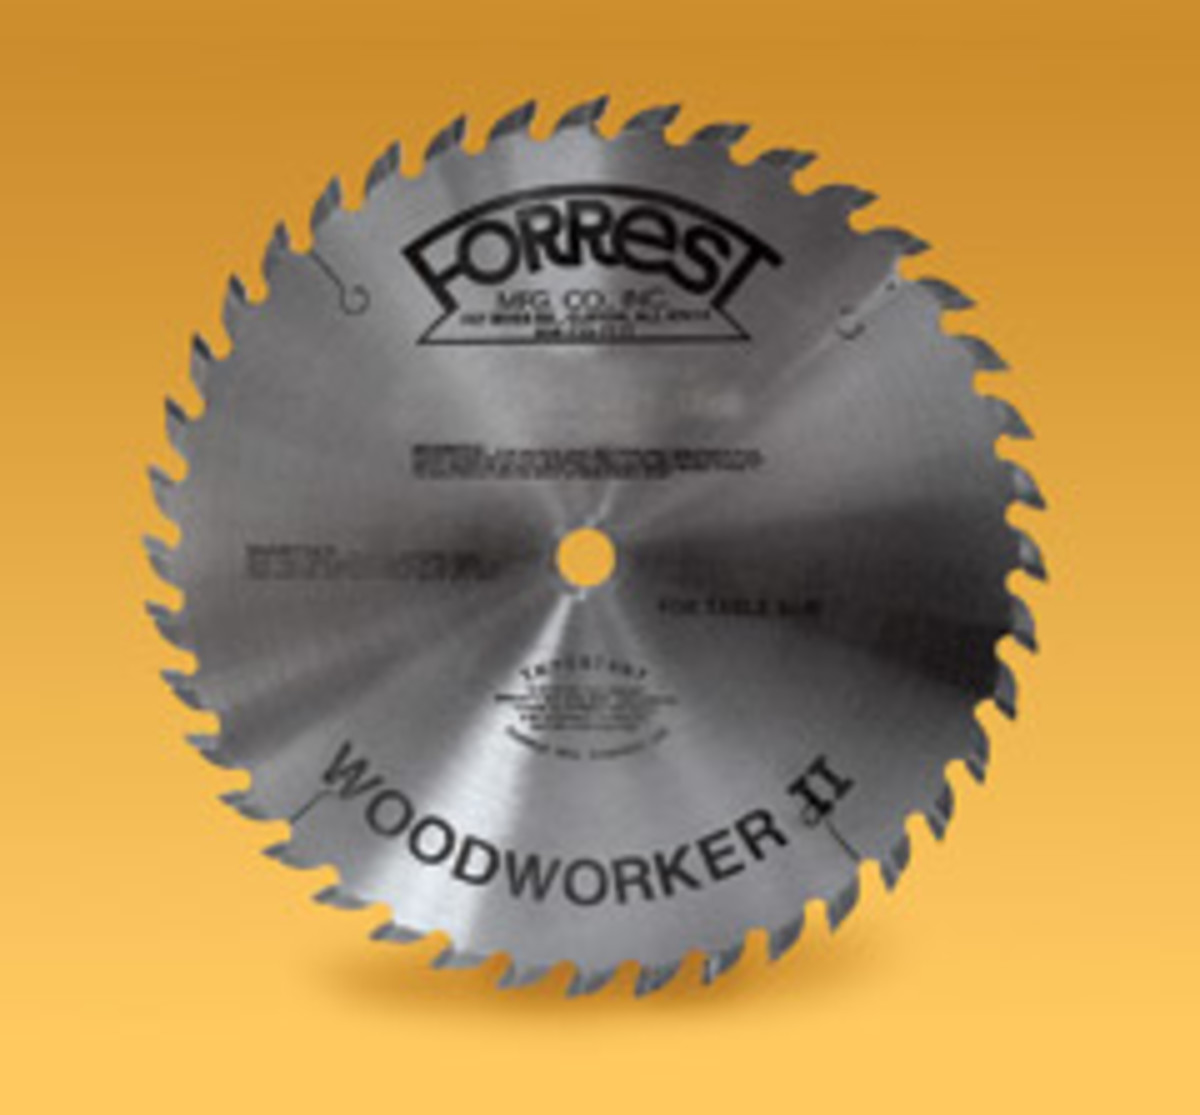 Forrest Mfg. offers custom grinding for its Woodworker II saw blade.